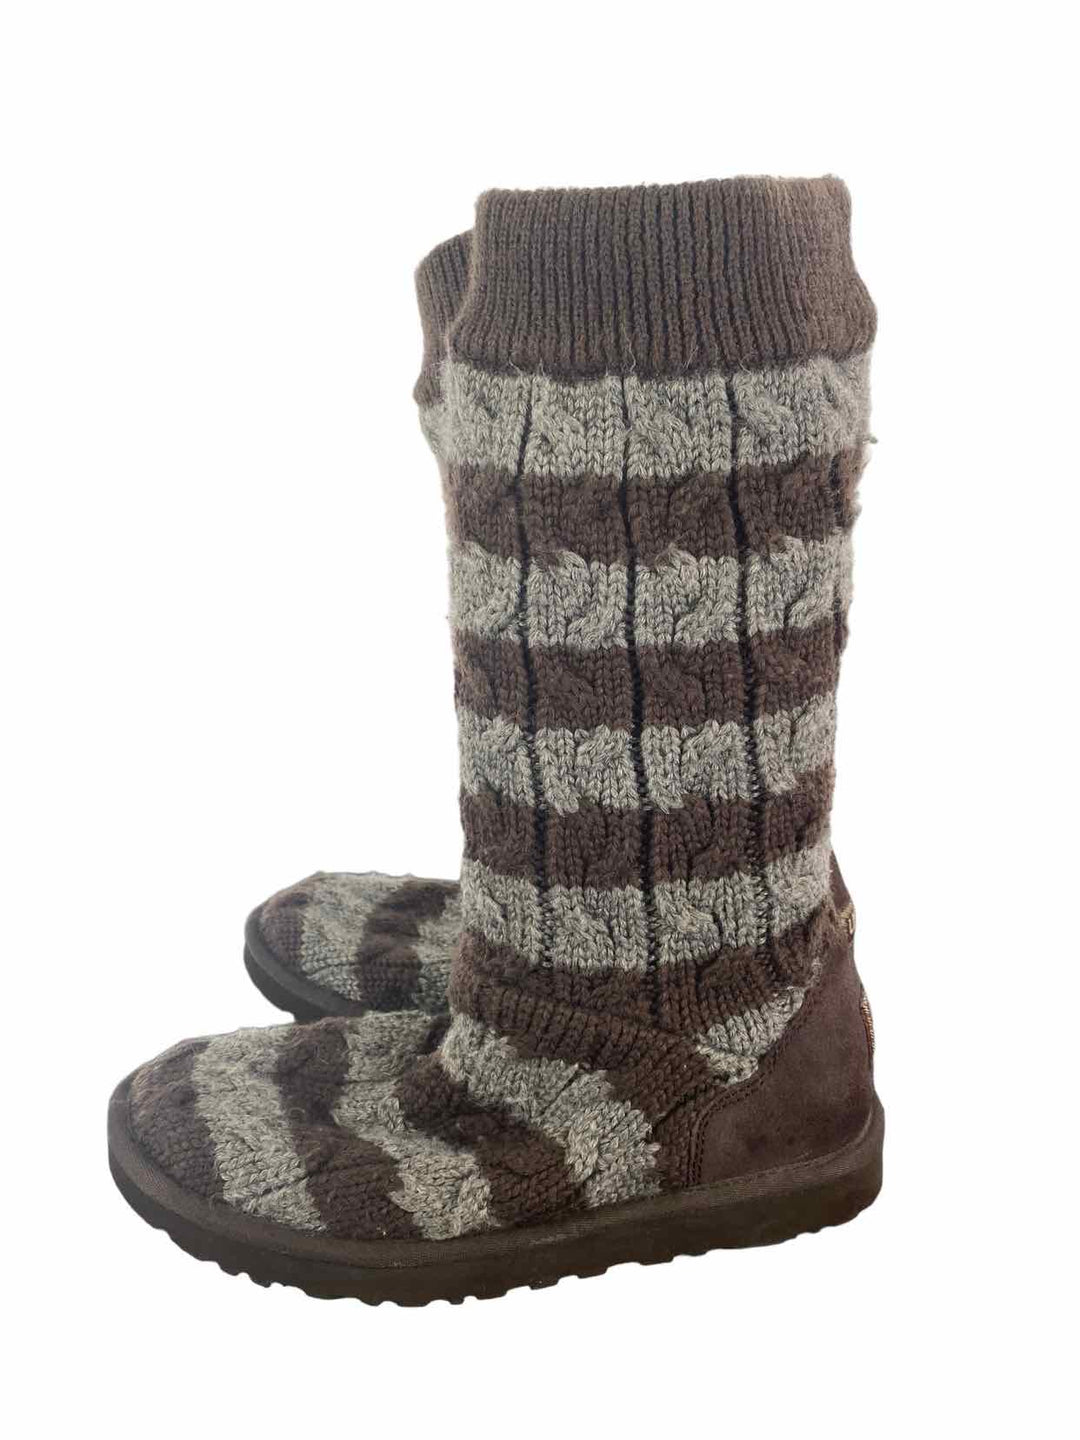 UGG Shoe Size 9 Brown Gray Knit Boots(Ankle)